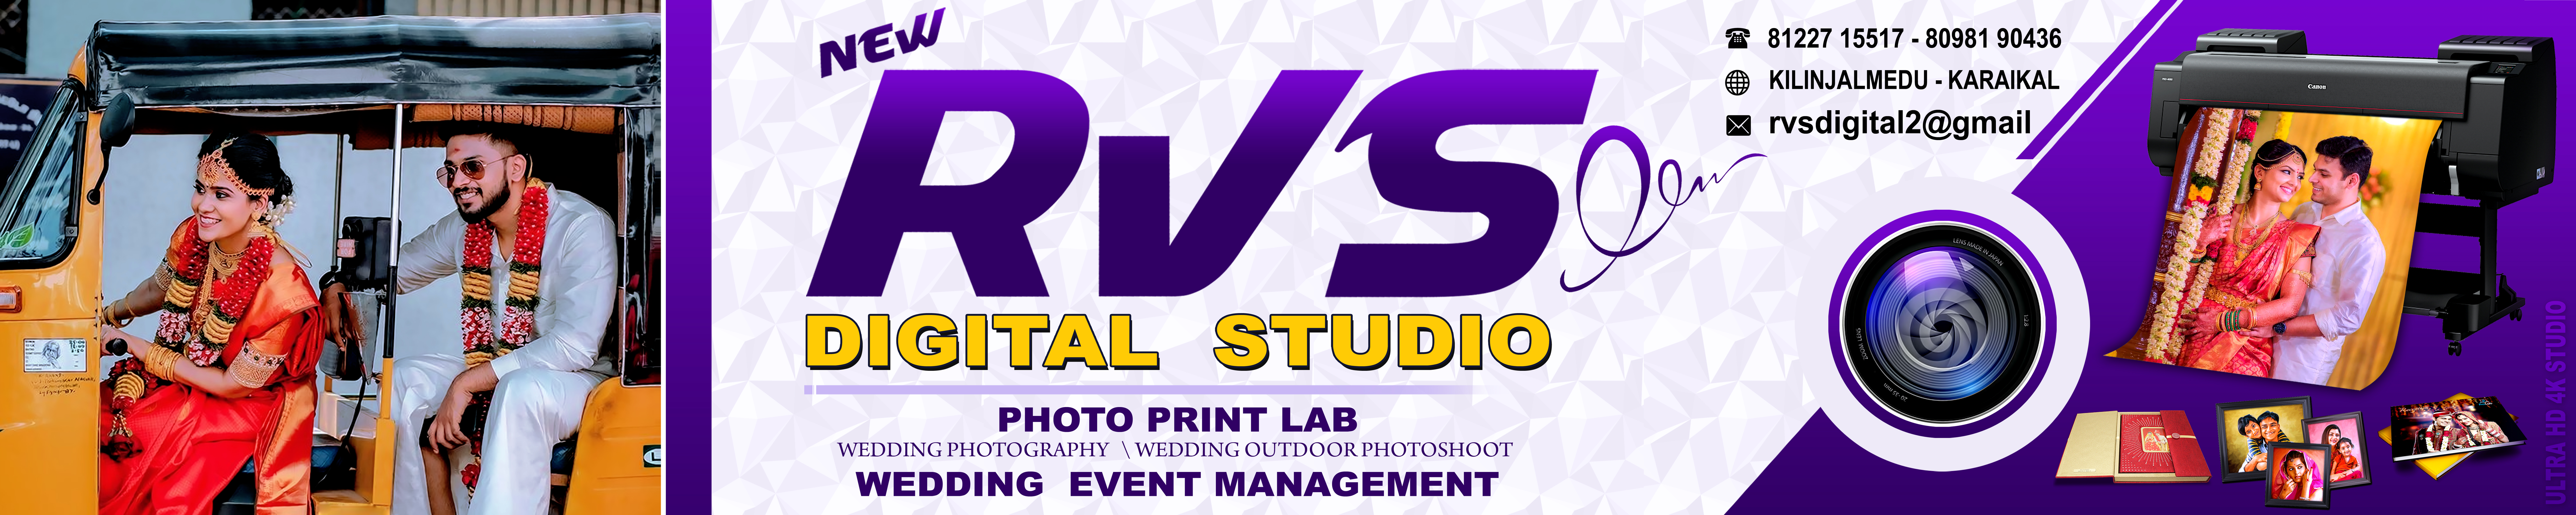 Photography|Photographer|Event Services